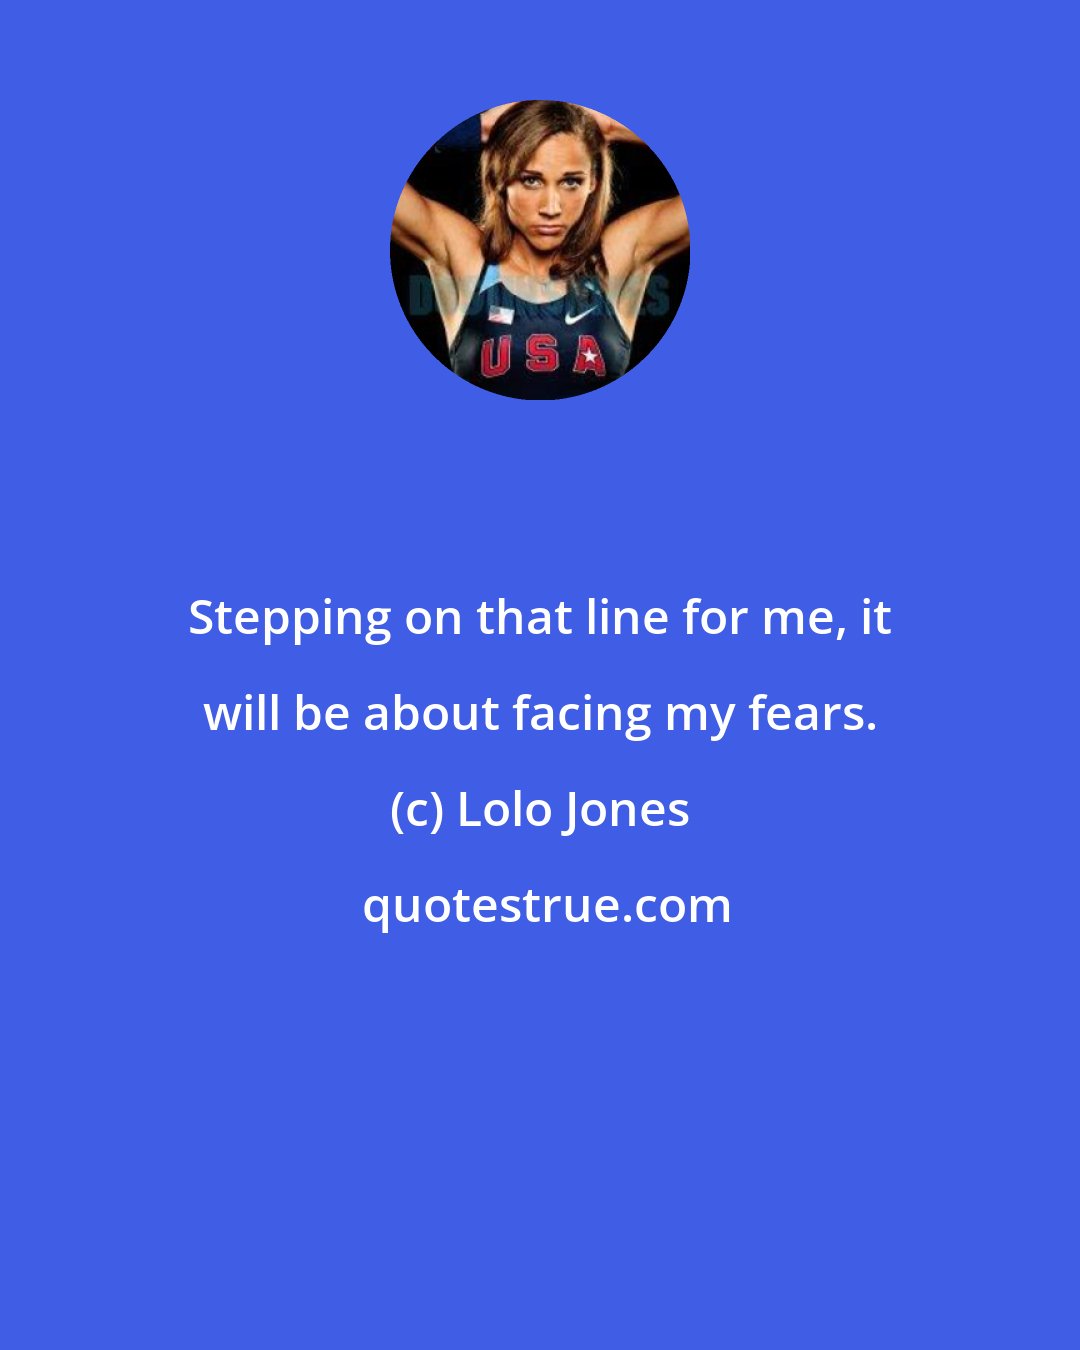 Lolo Jones: Stepping on that line for me, it will be about facing my fears.